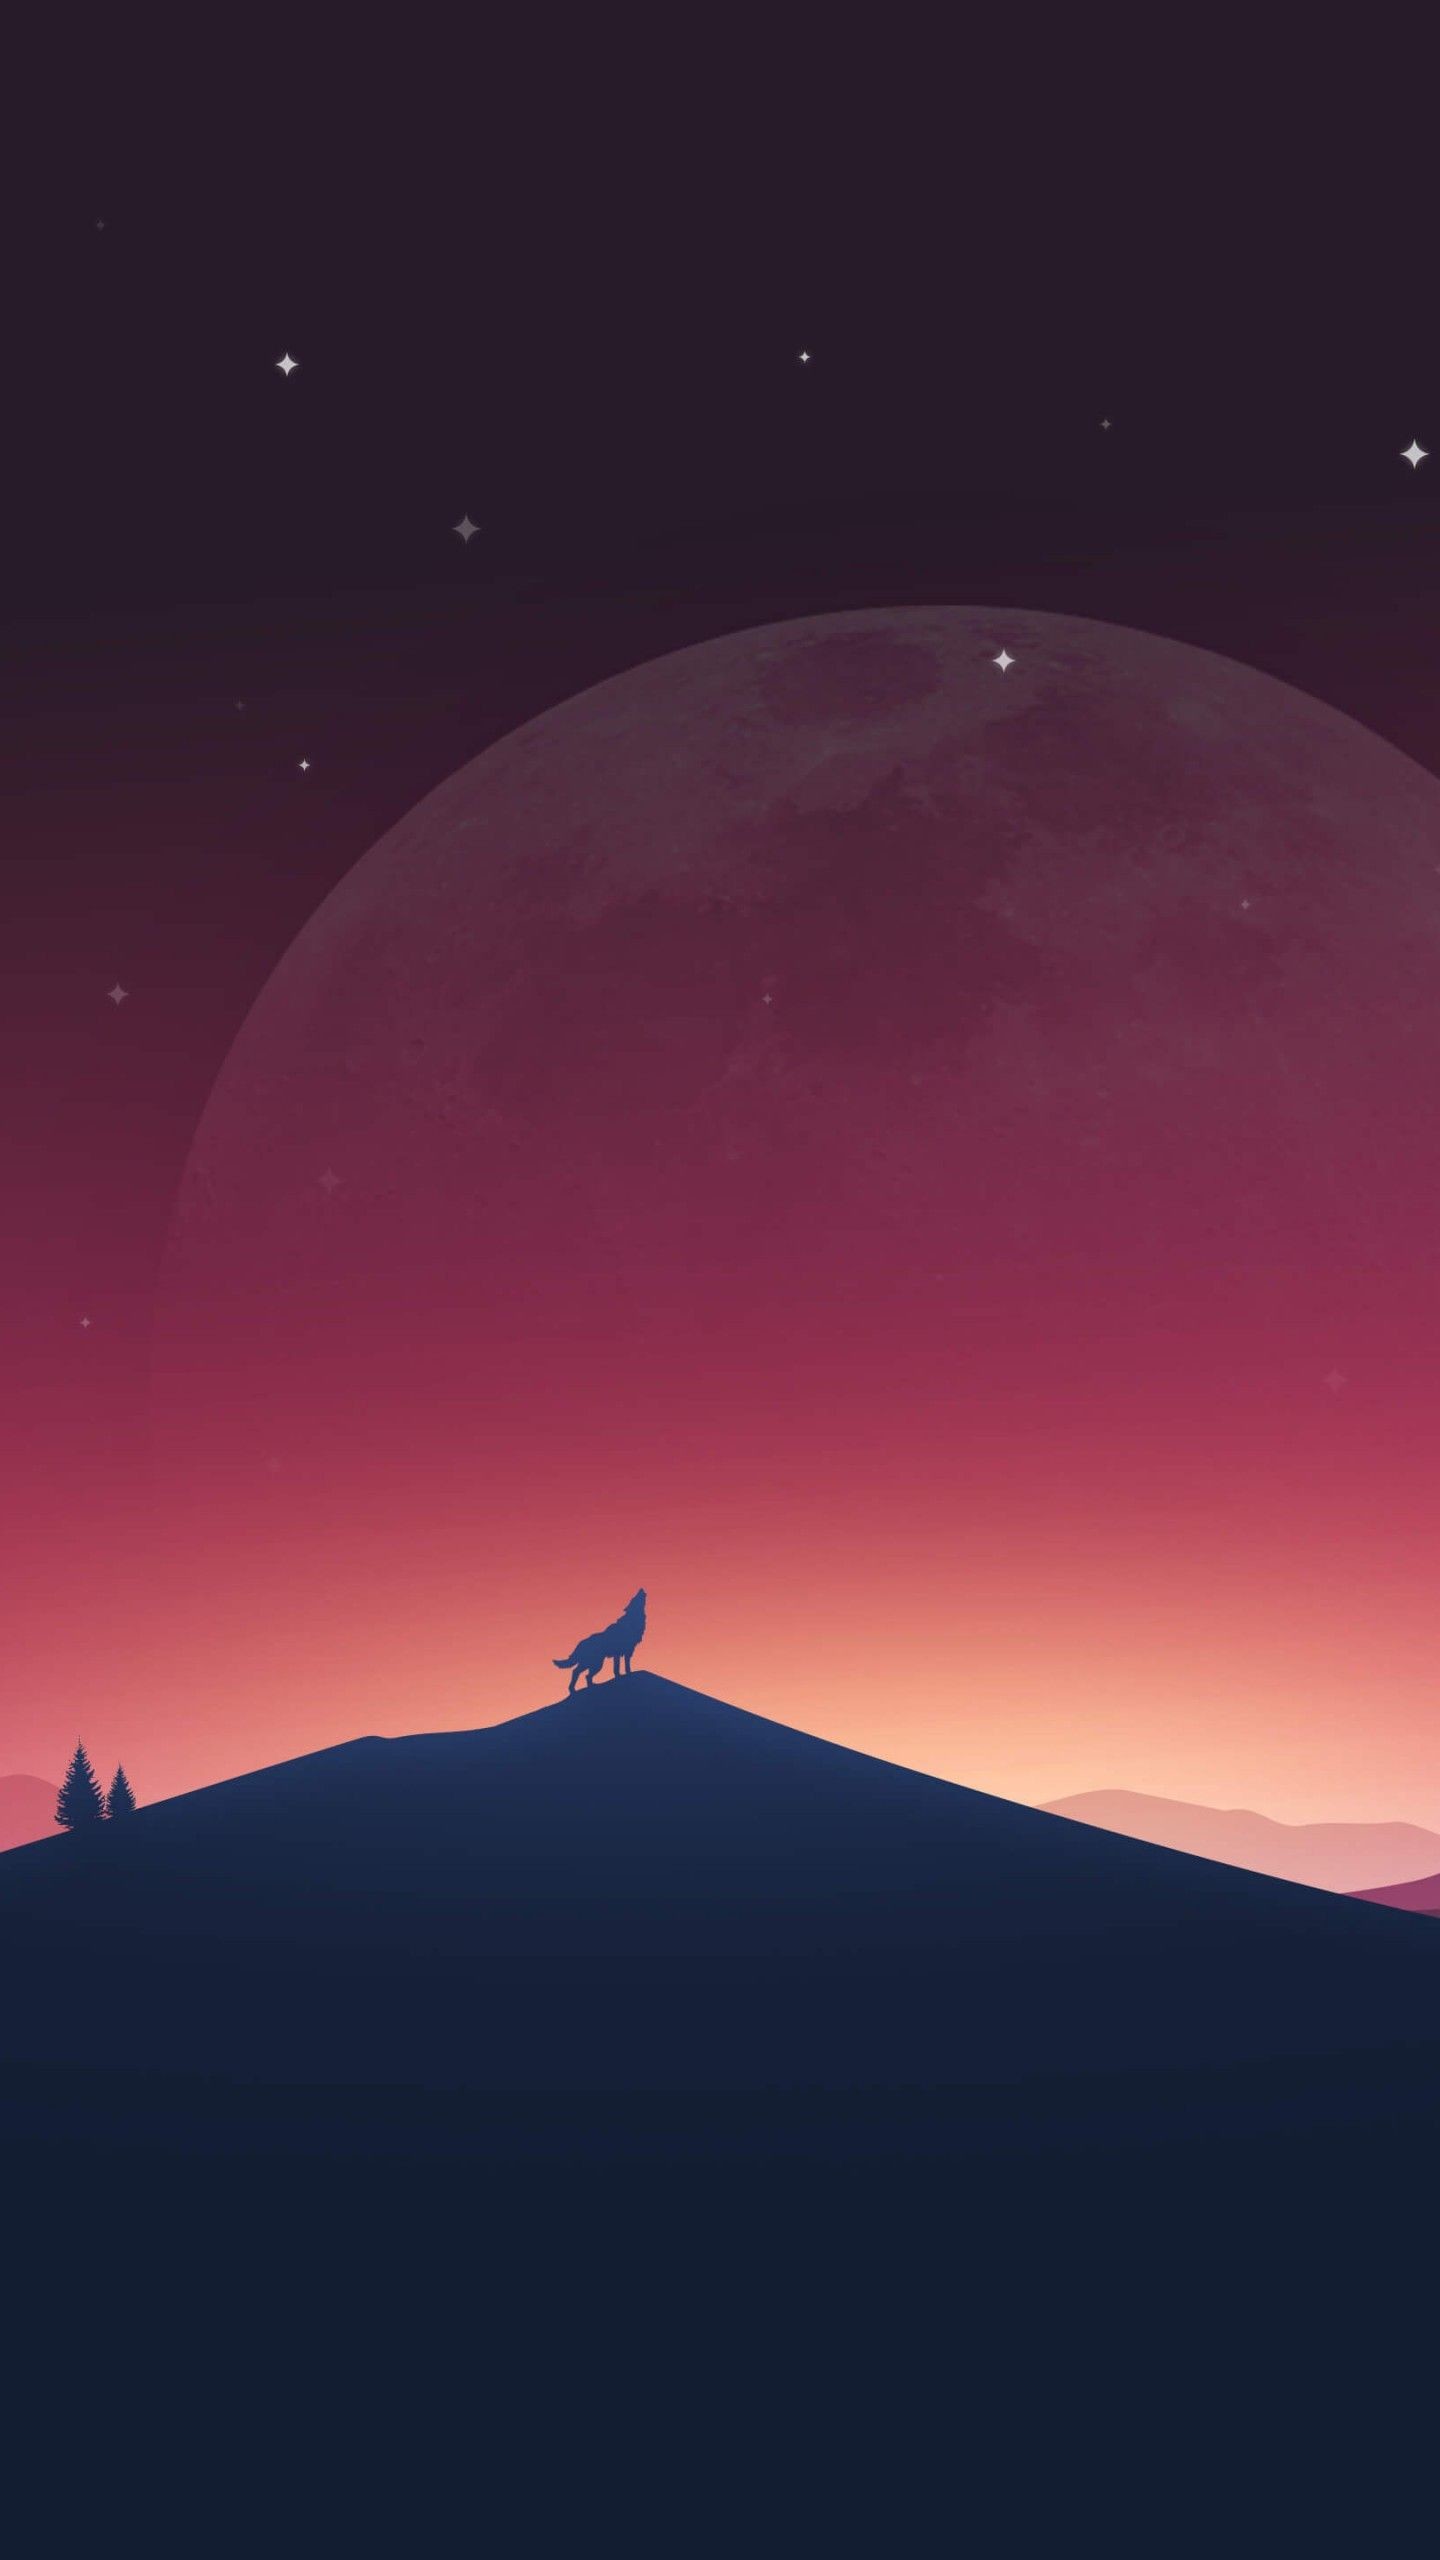 1440x2560, Download Wolf Howling At The Moon Hd Wallpaper - 4k Minimalist Wallpaper Phone - HD Wallpaper 